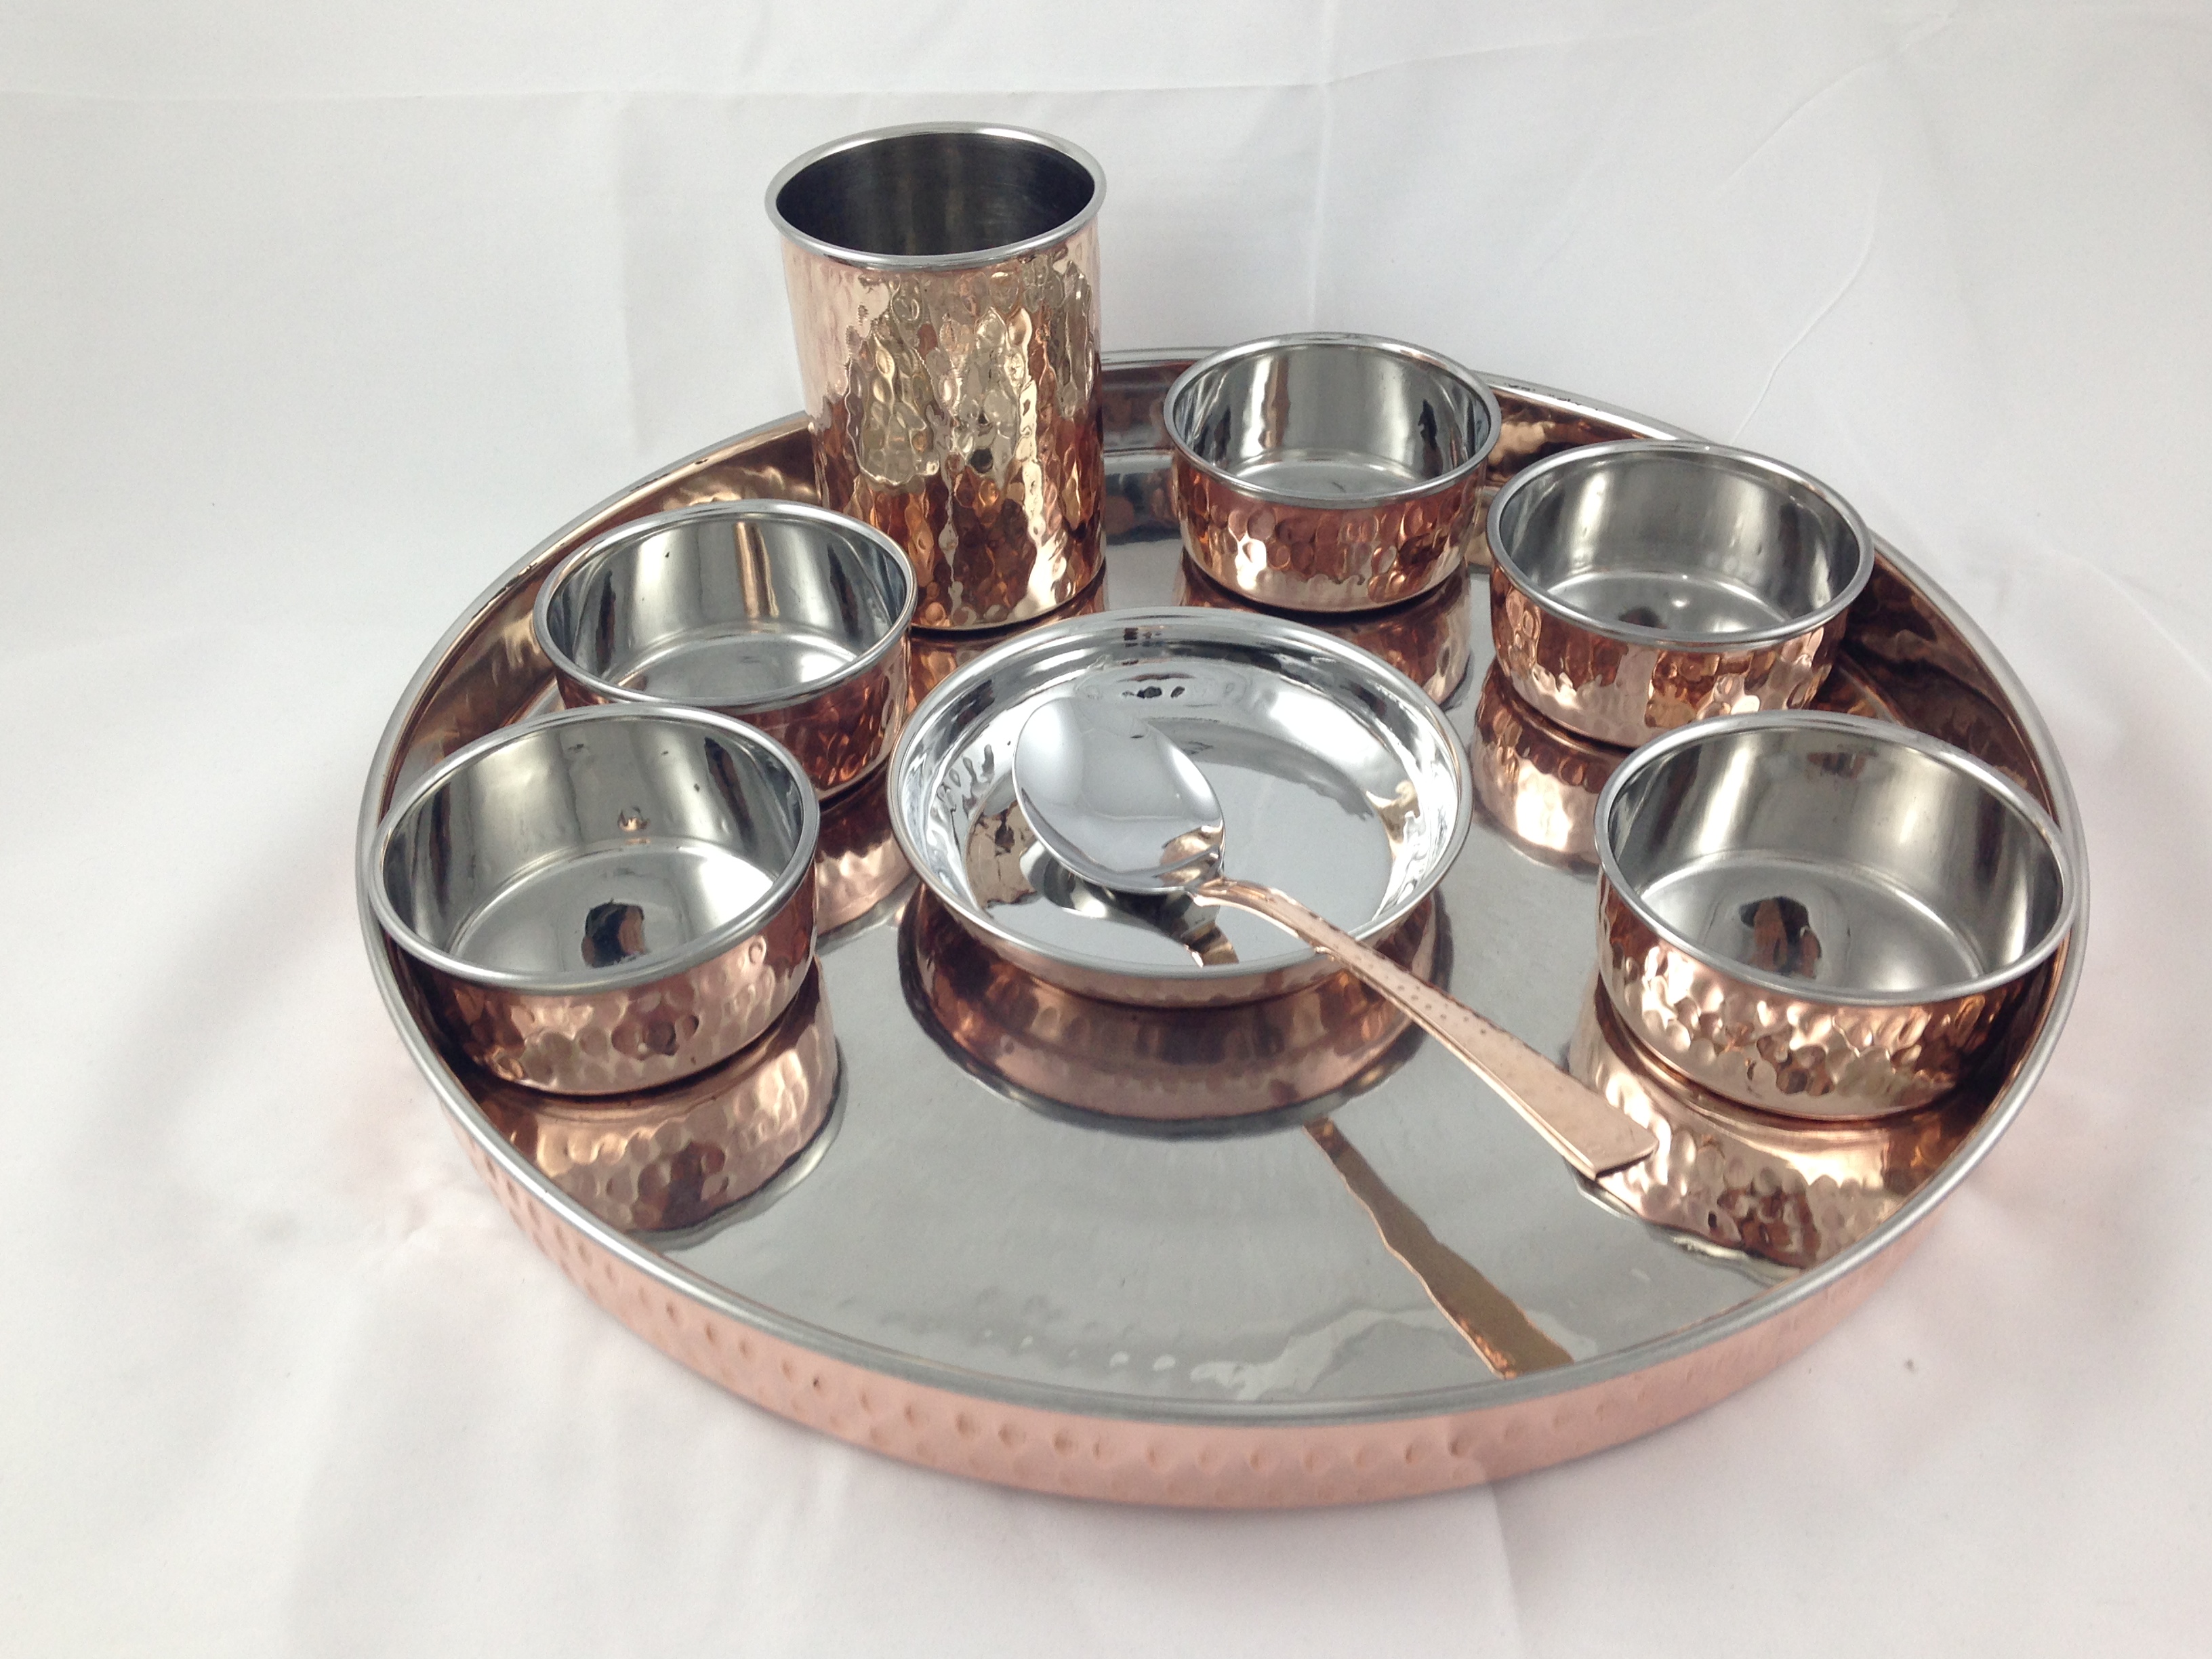 Copper and steel thali set BSFS-160